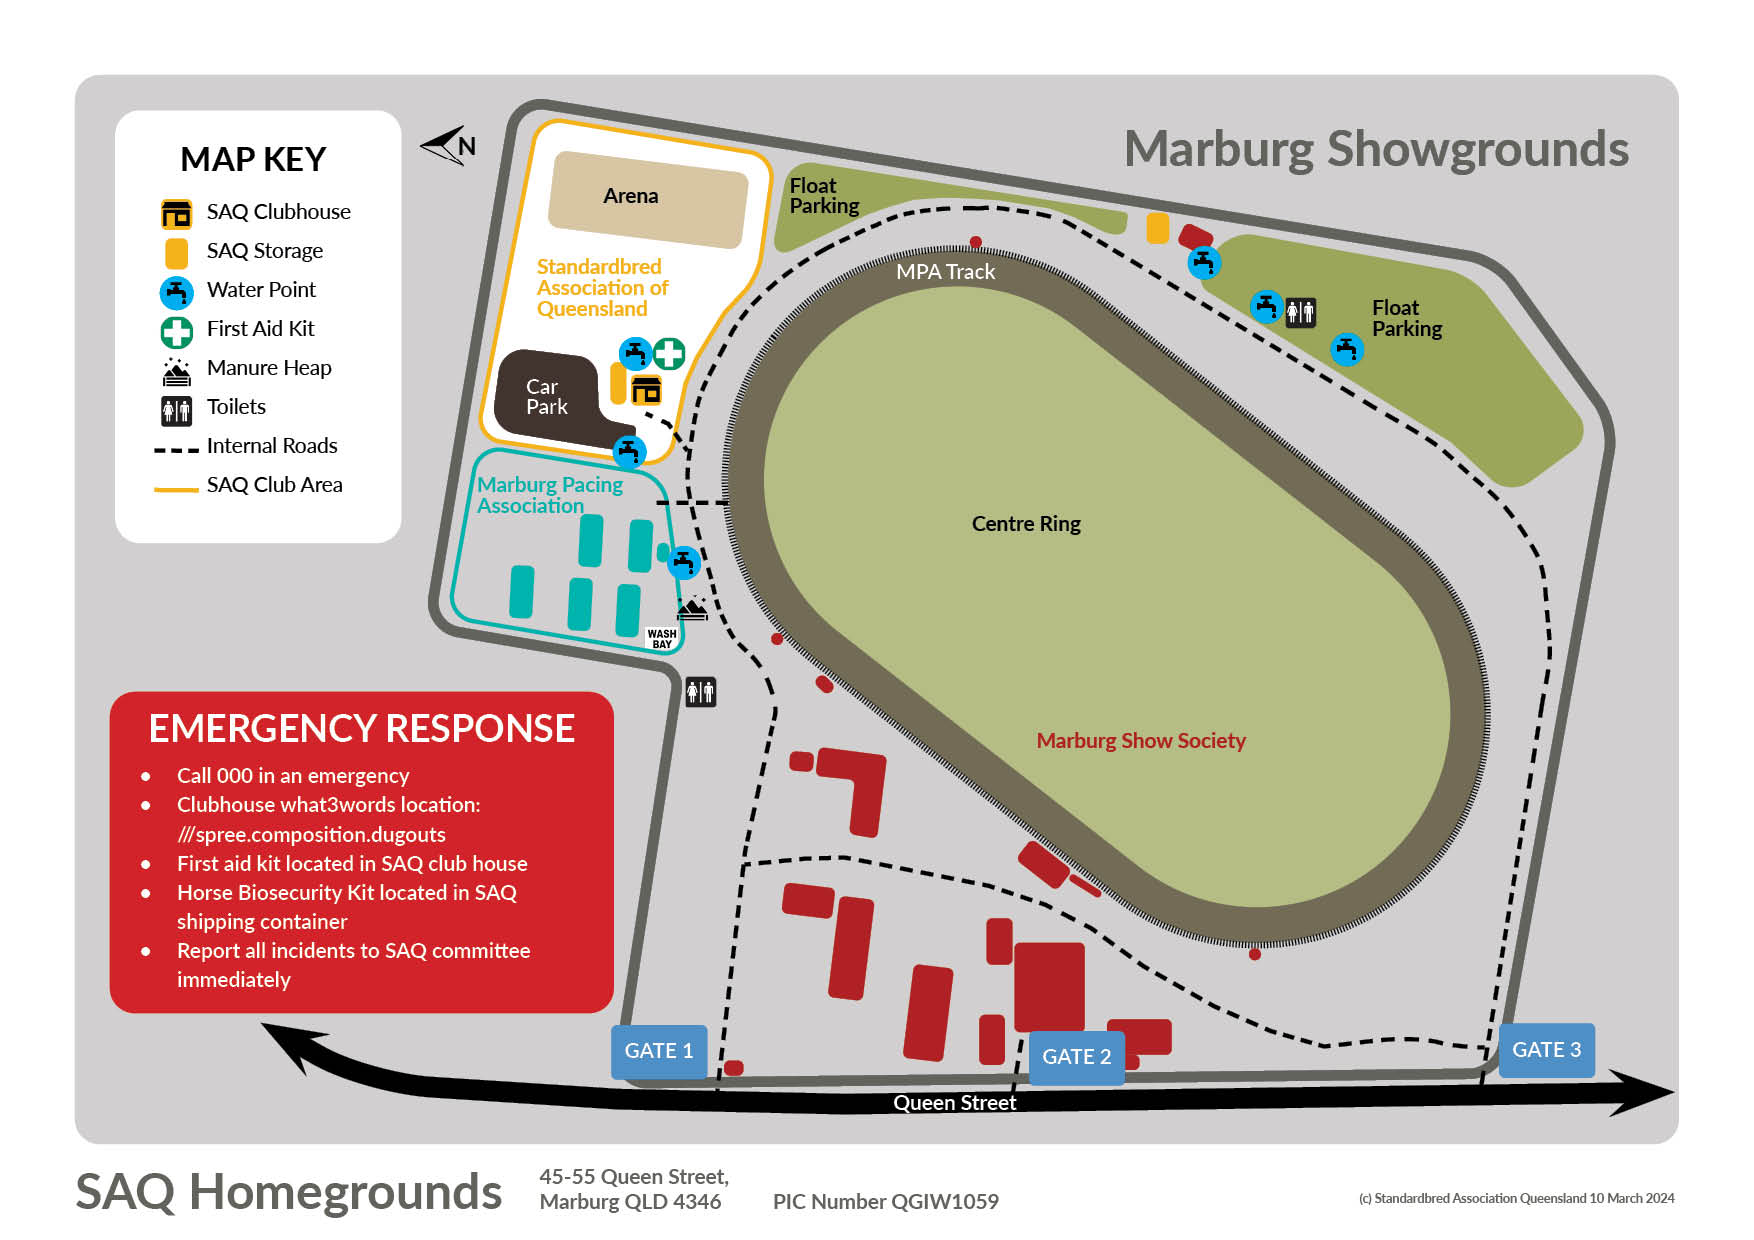 SAQ club grounds map. Located at Marburg Showgrounds